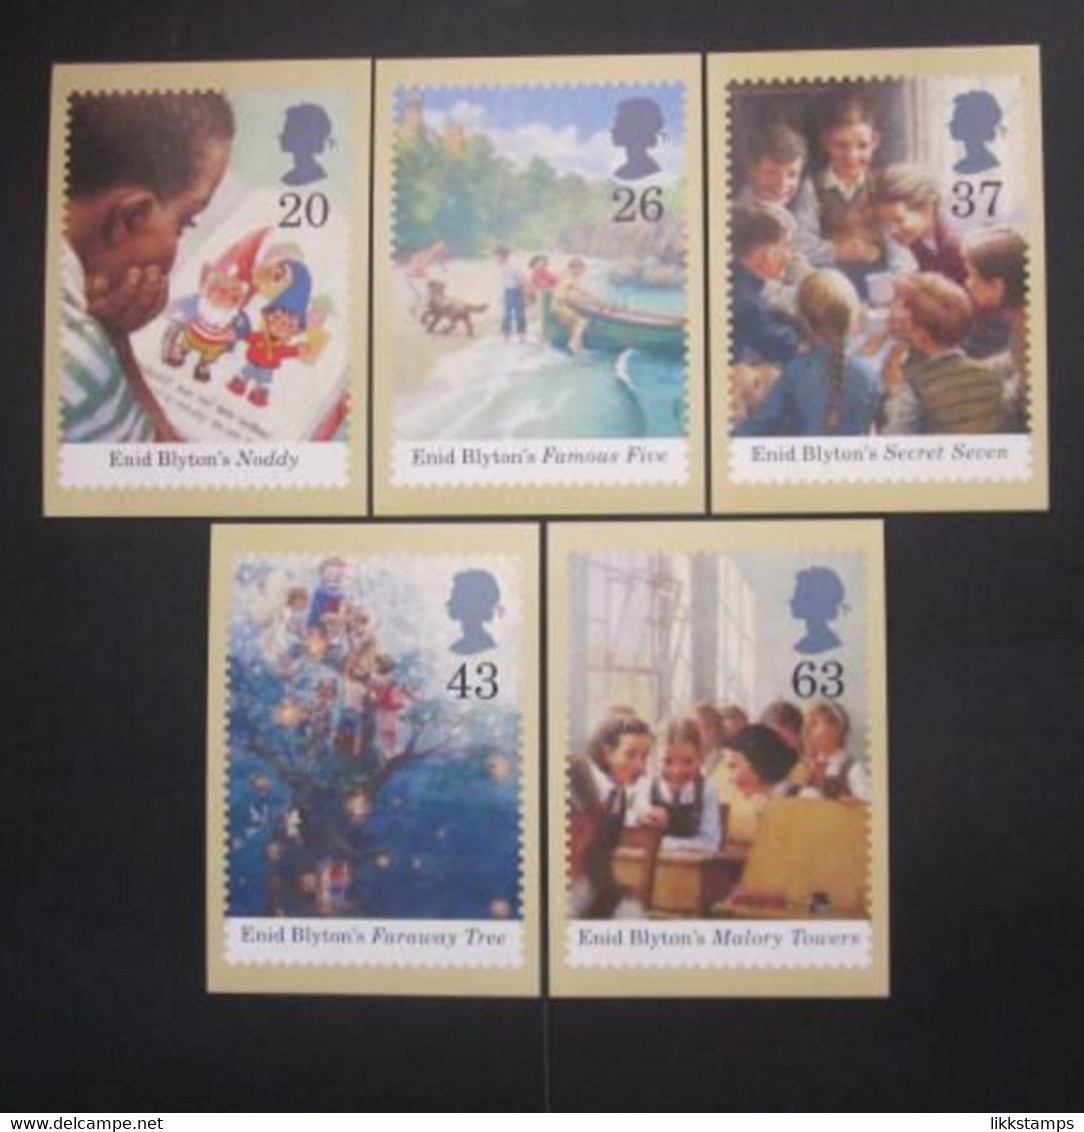 1997 THE BIRTH CENTENARY OF ENID BLYTON P.H.Q. CARDS UNUSED, ISSUE No. 191 (B) #00957 - Cartes PHQ